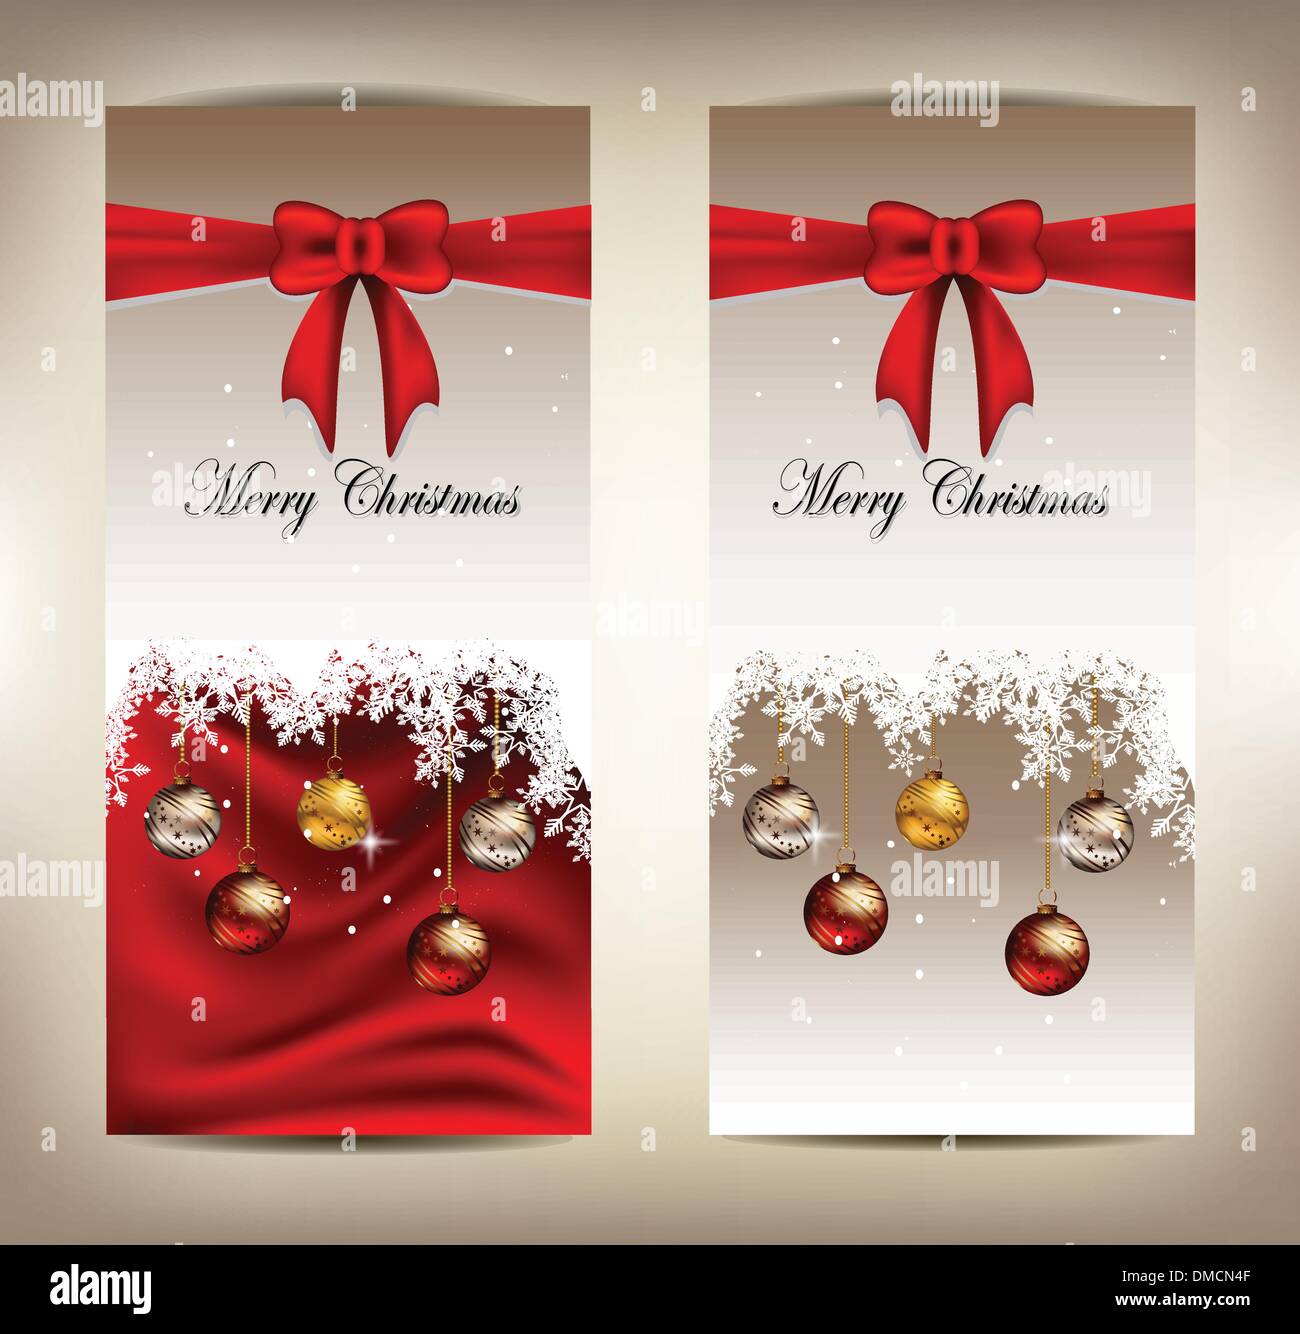 Christmas Icons Seamless Pattern Xmas Background Happy New Year Red  Background Merry Christmas Holiday Pattern Eps 10 Stock Illustration -  Download Image Now - iStock